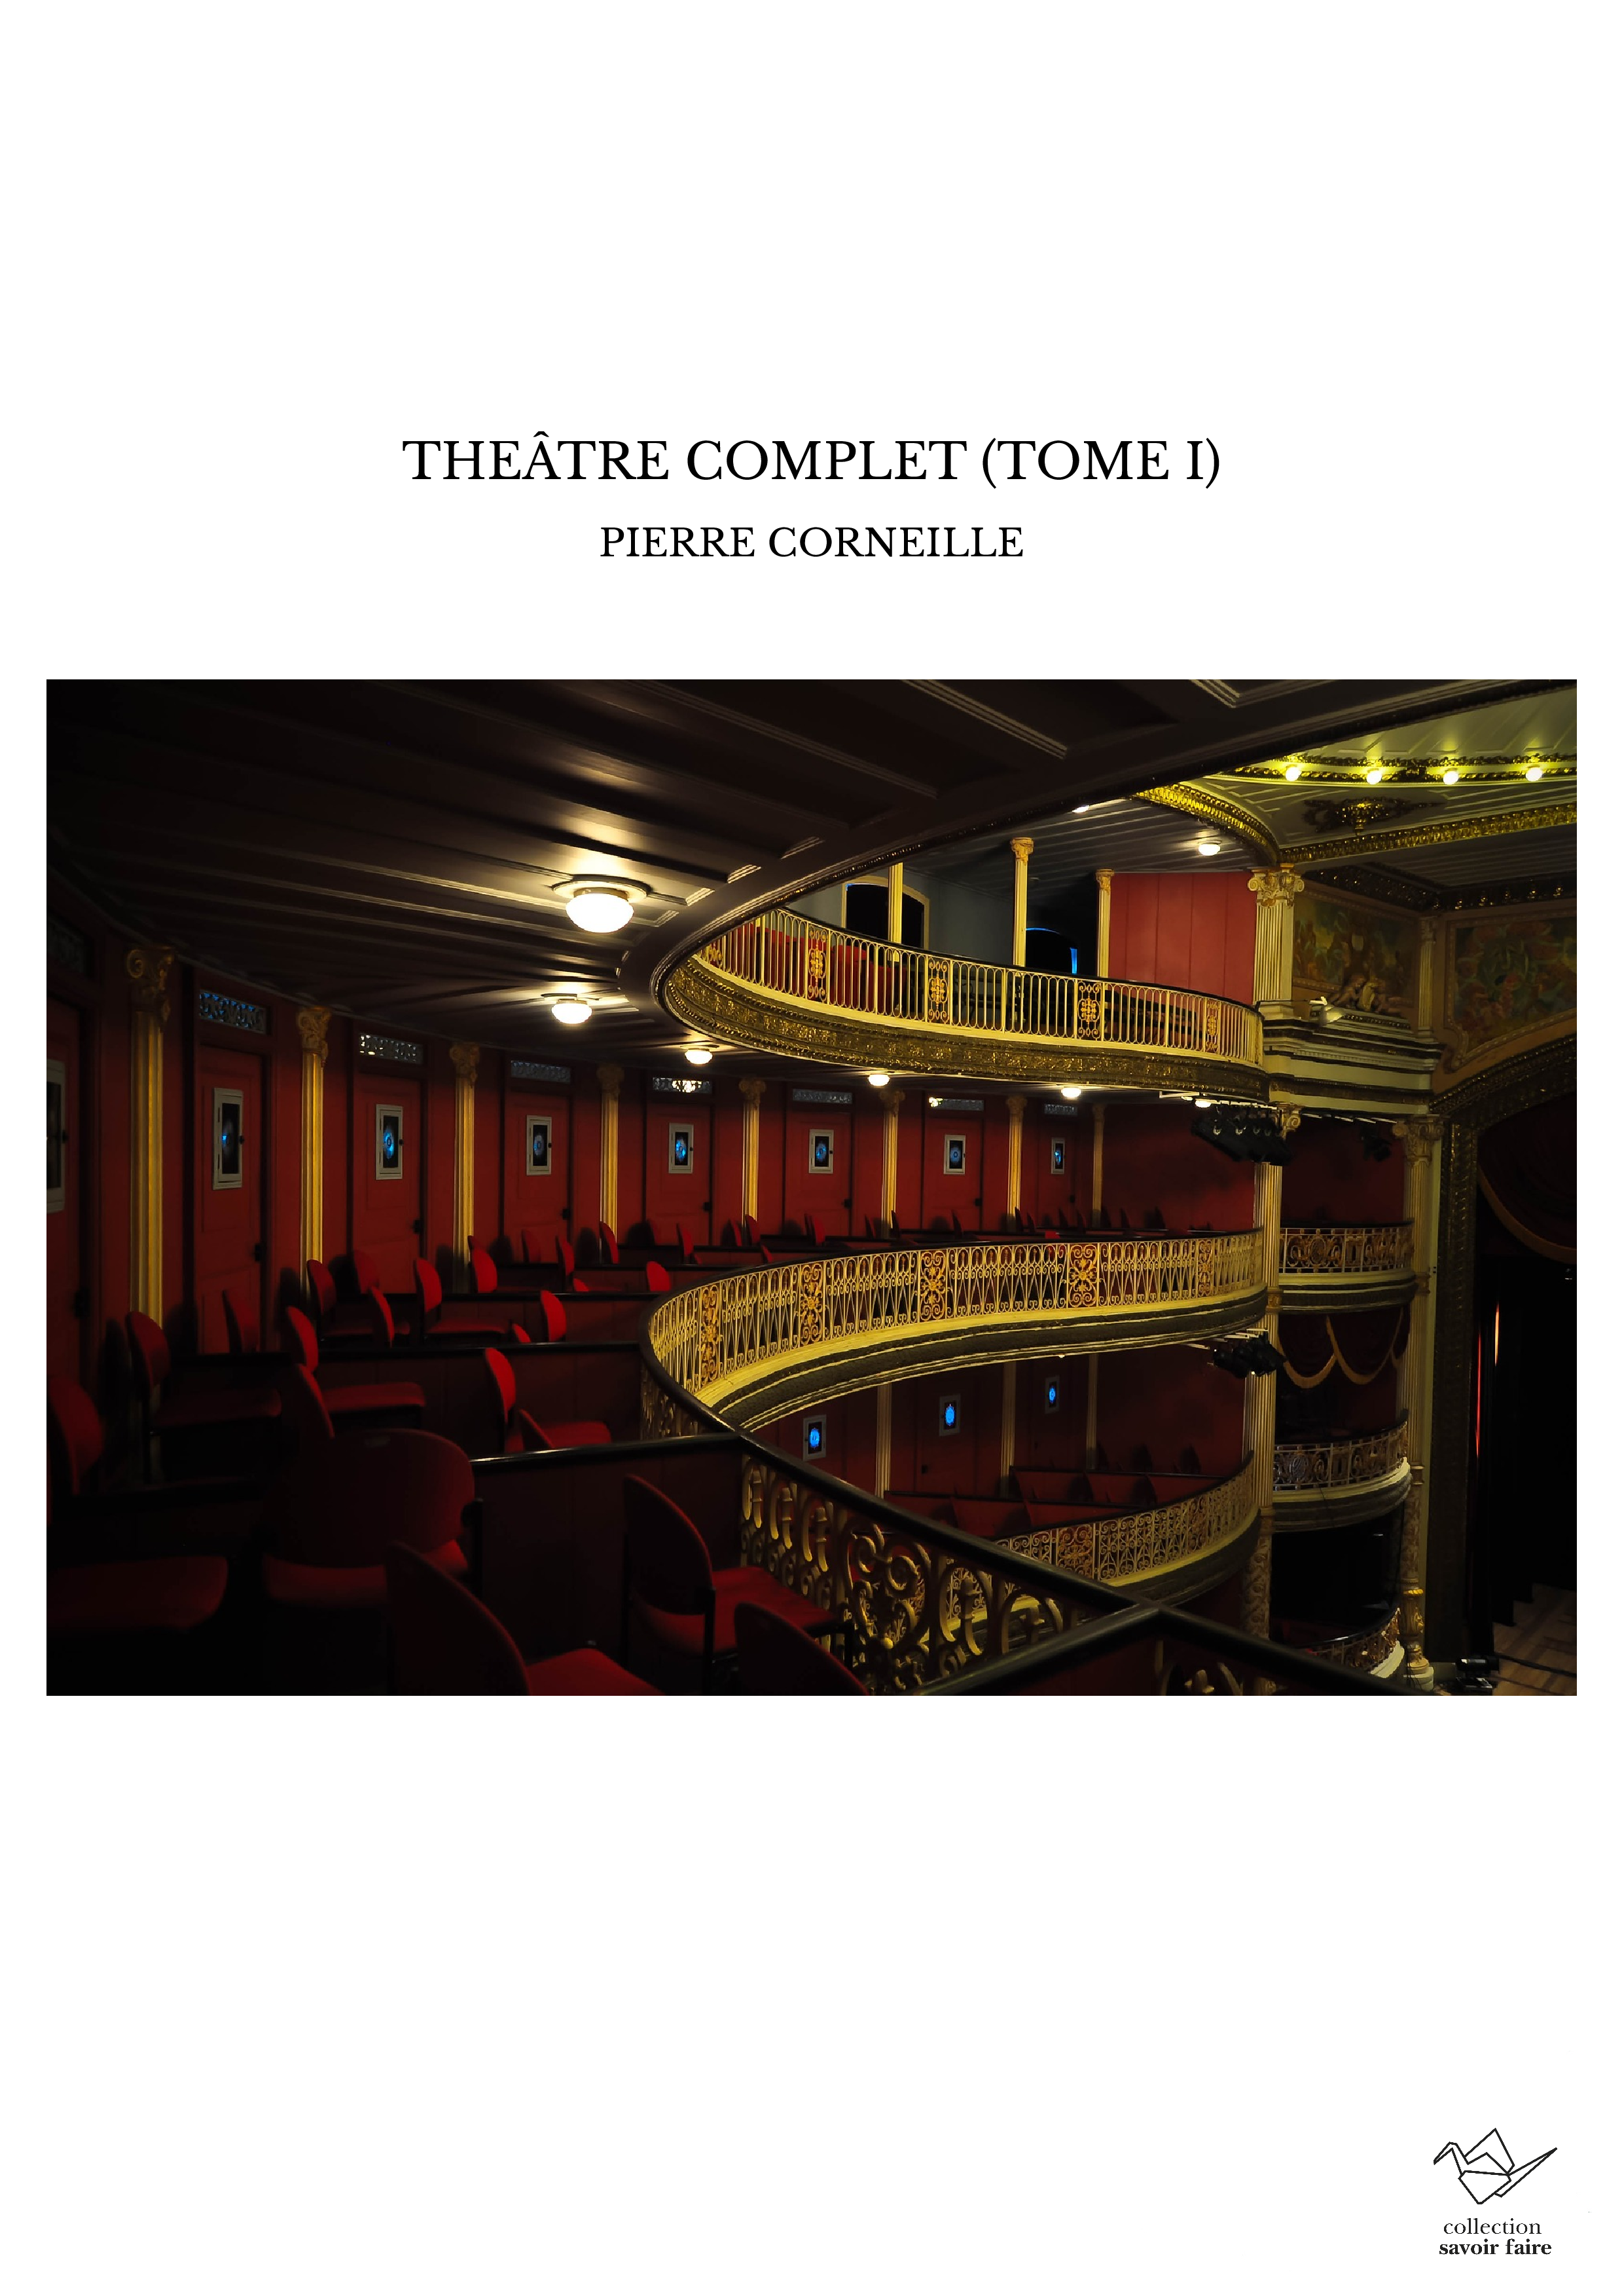 THEÂTRE COMPLET (TOME I)